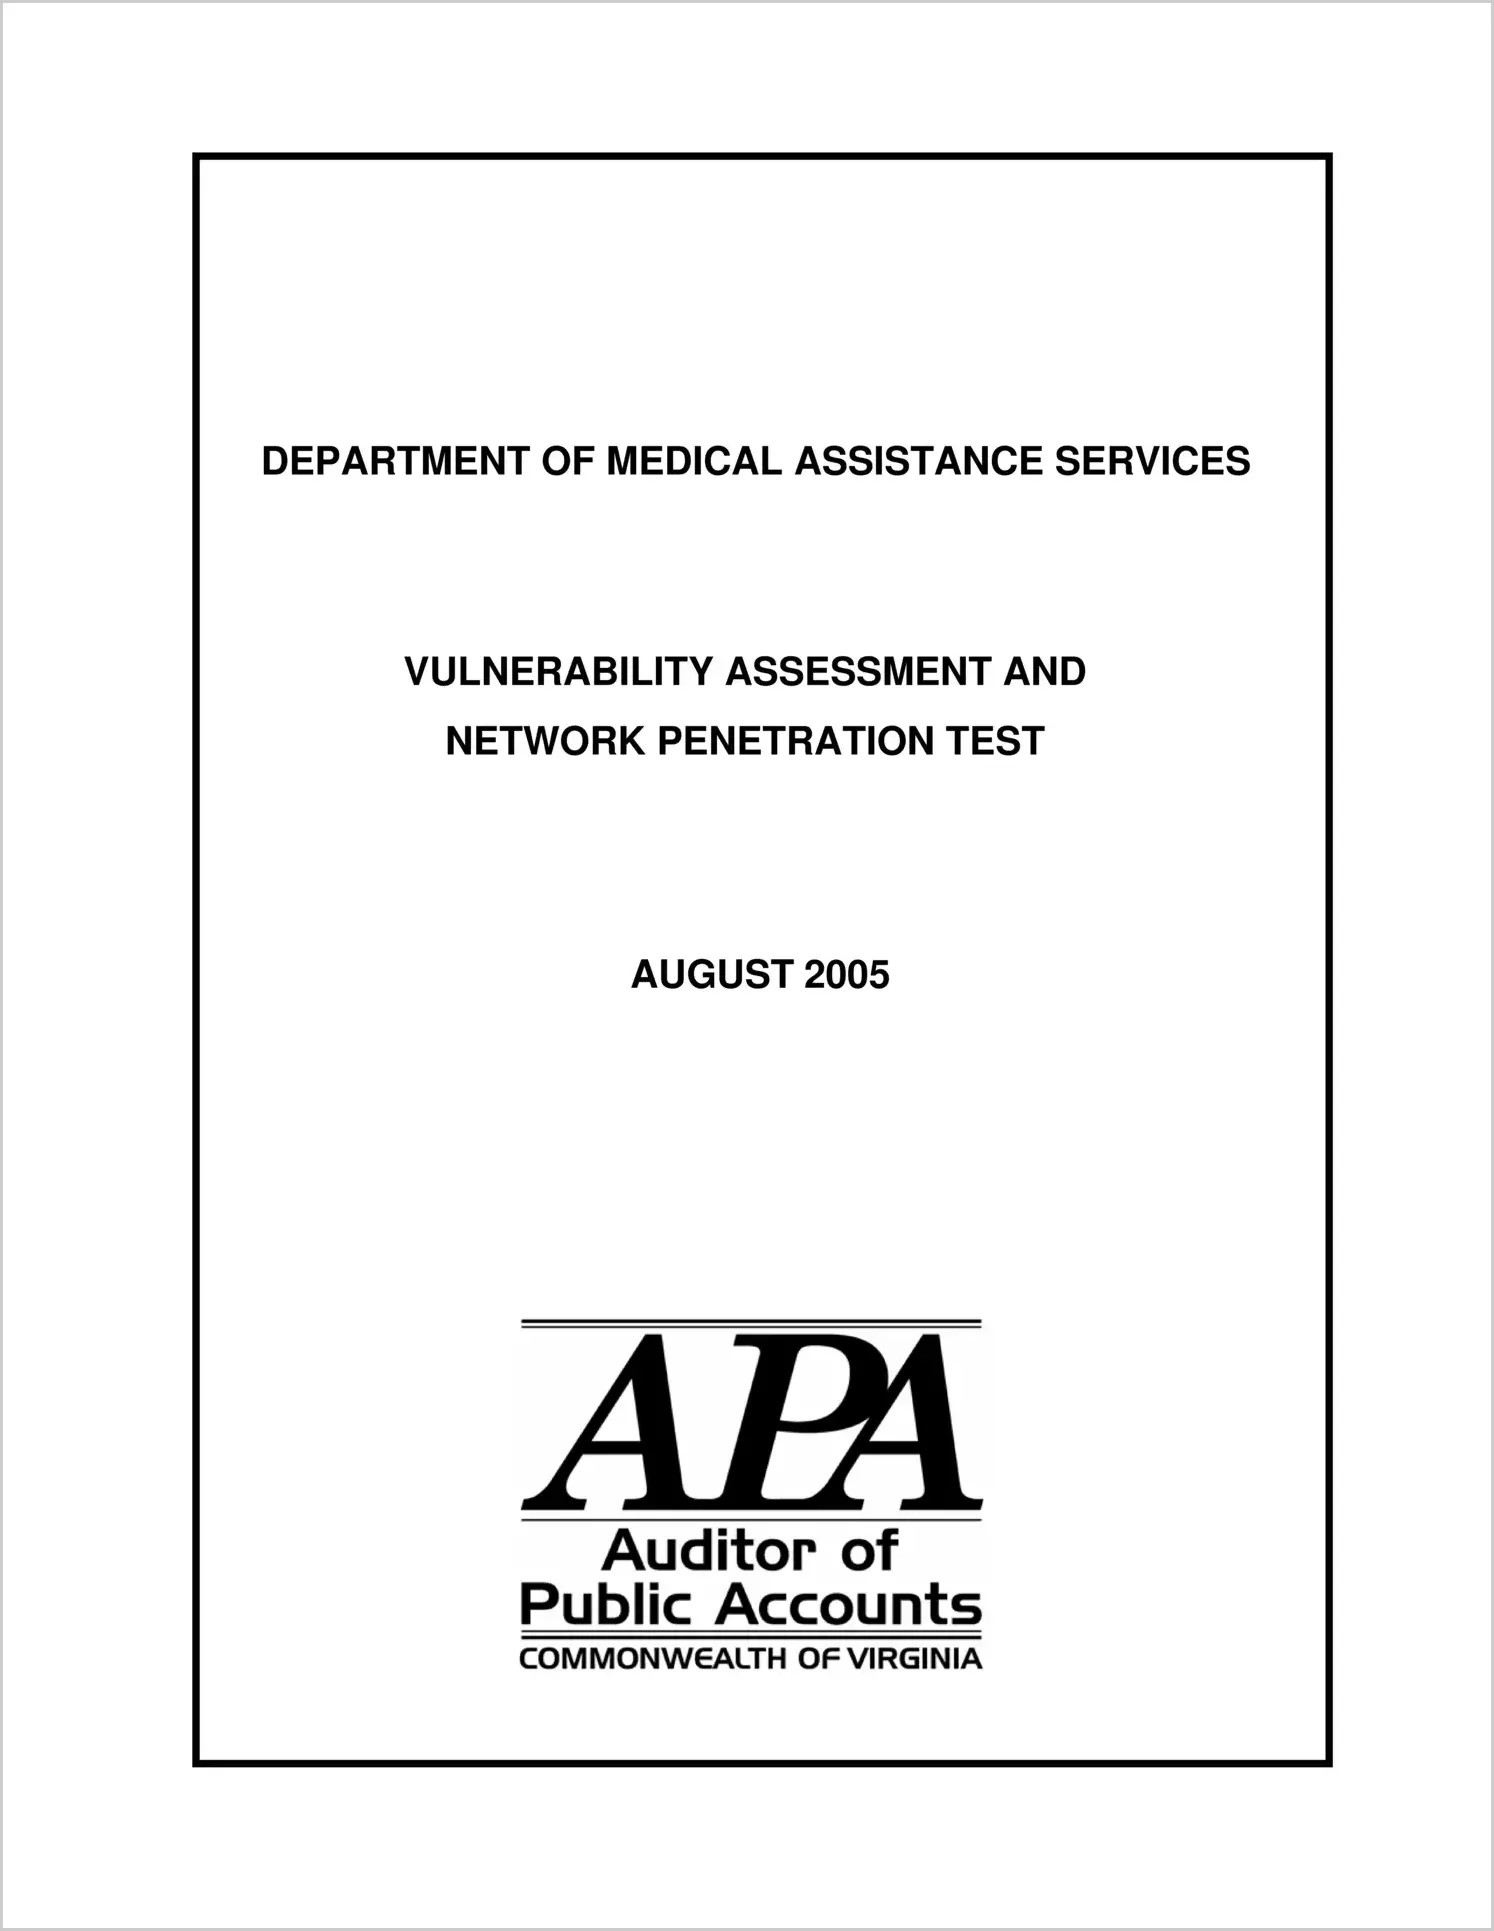 Special ReportDepartment of Medical Assistance Services Vulnerability Assessment and Network Penetration Test(Report Date: 8/05)